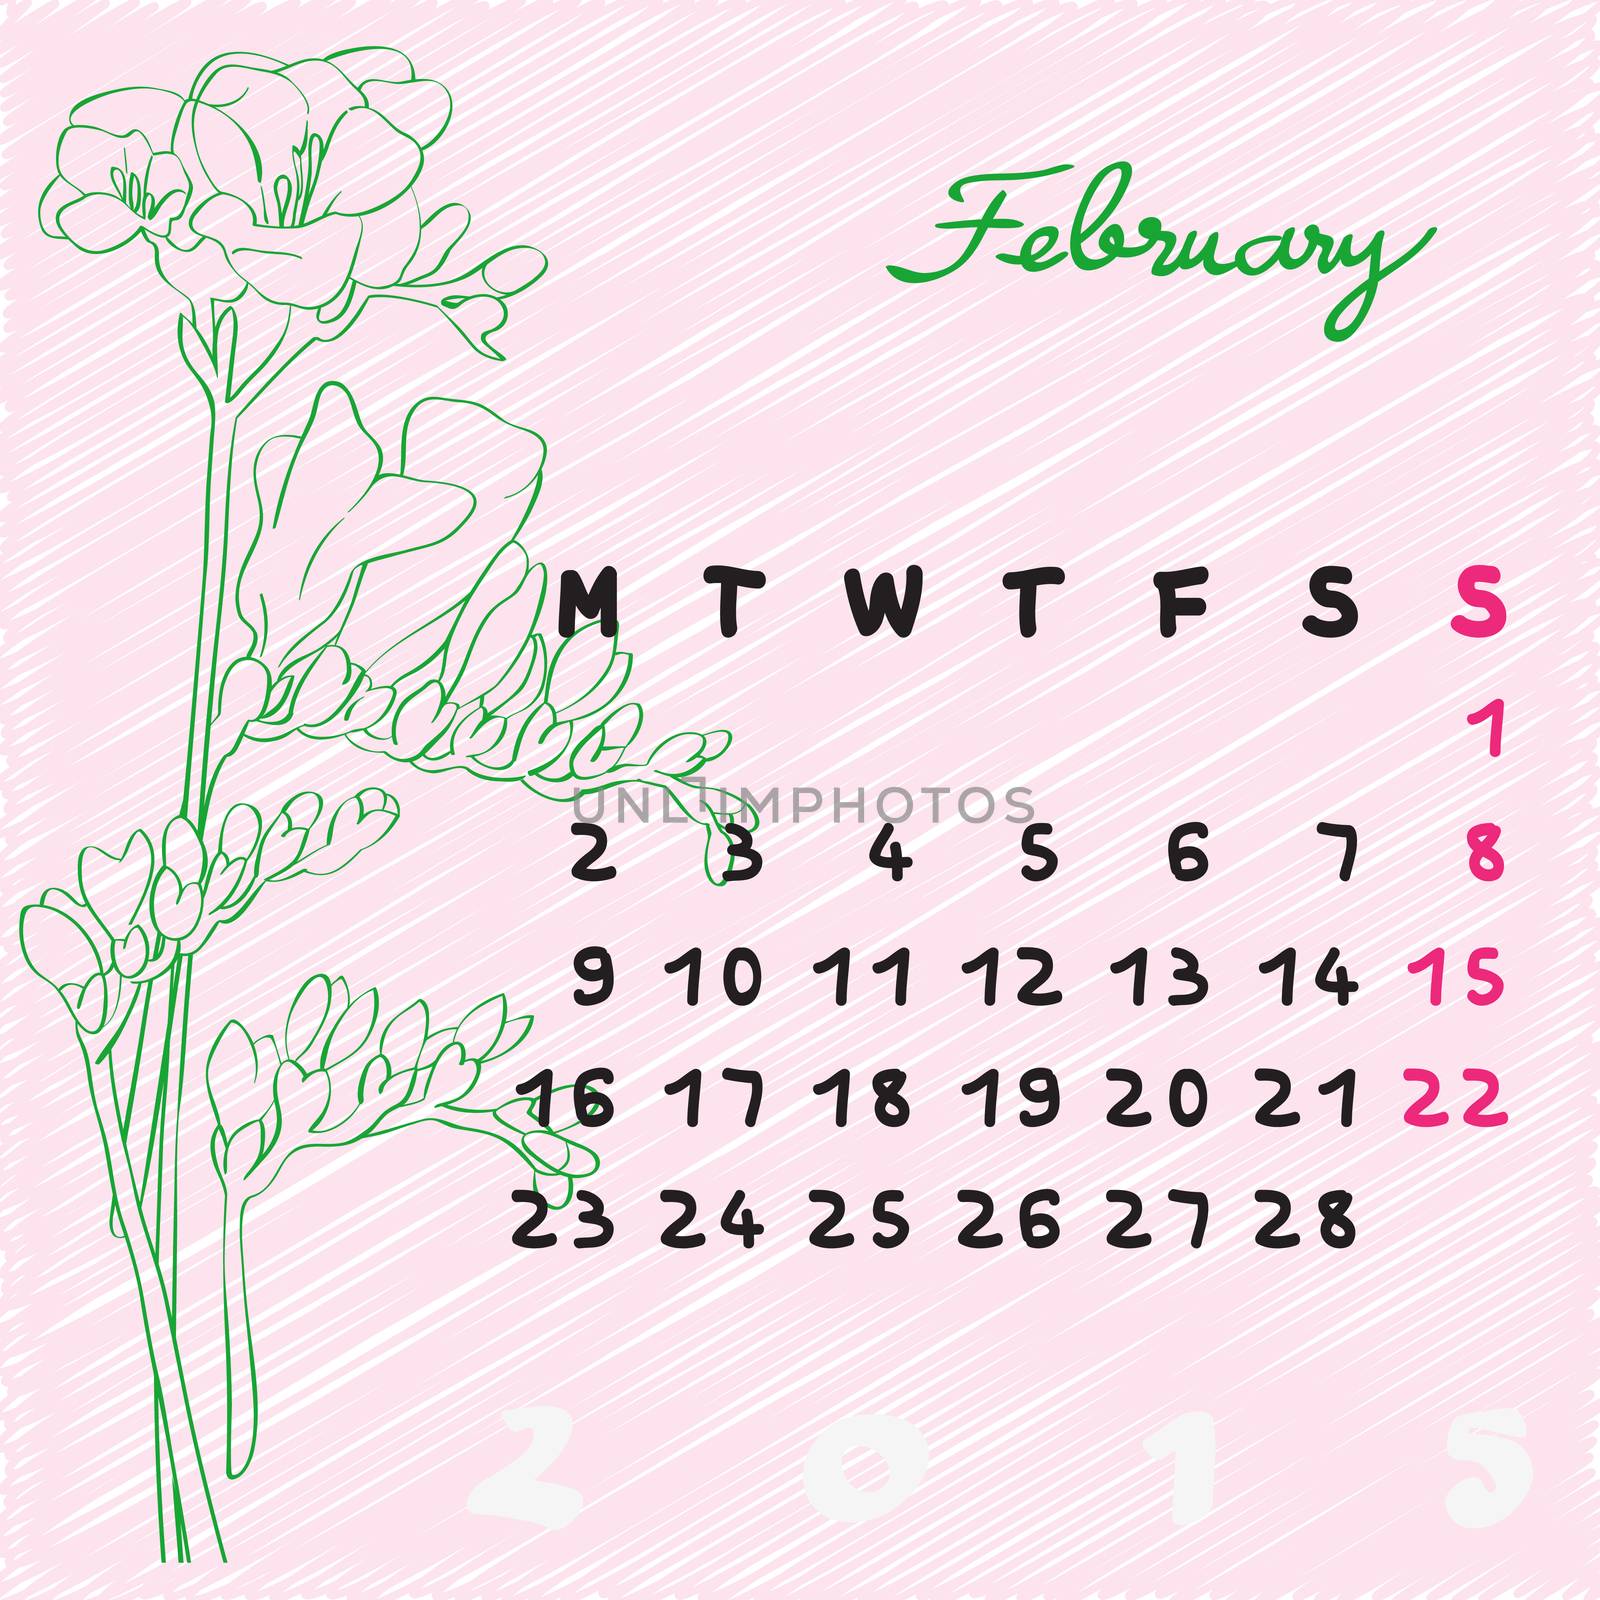 Calendar 2015, graphic illustration of February month calendar with original hand drawn text and freesia flowers